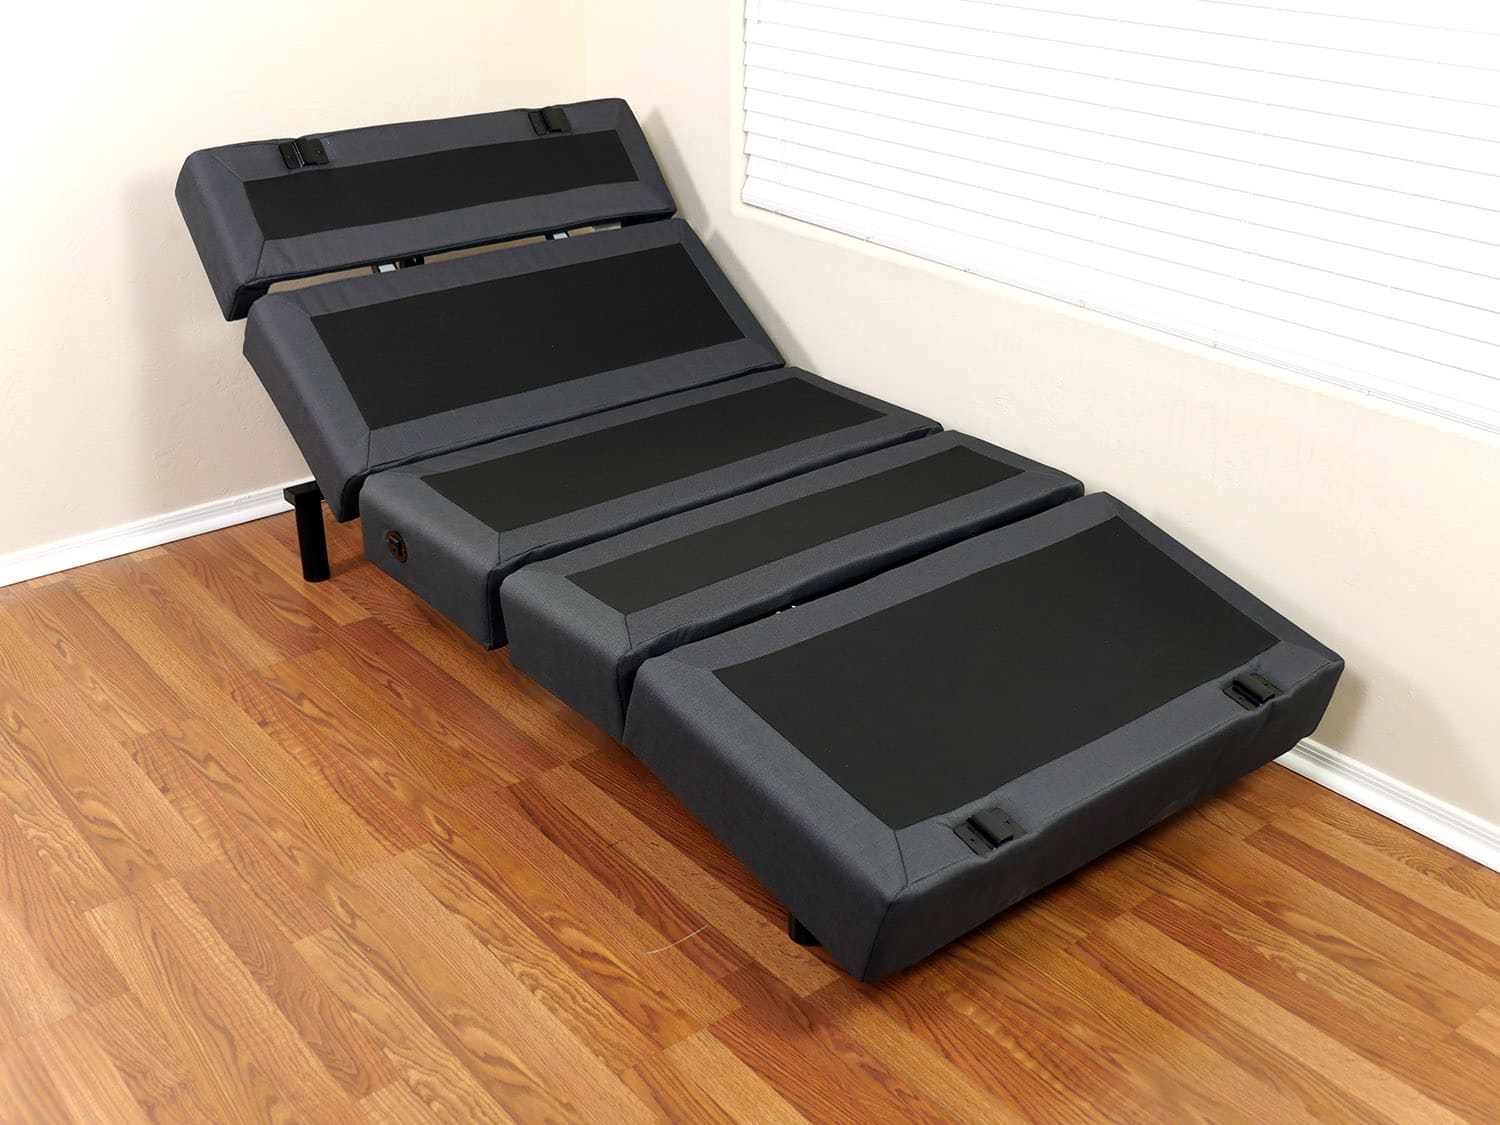 Adjustable Beds Reviews Sleepopolis, What Is The Best Adjustable Bed For Money